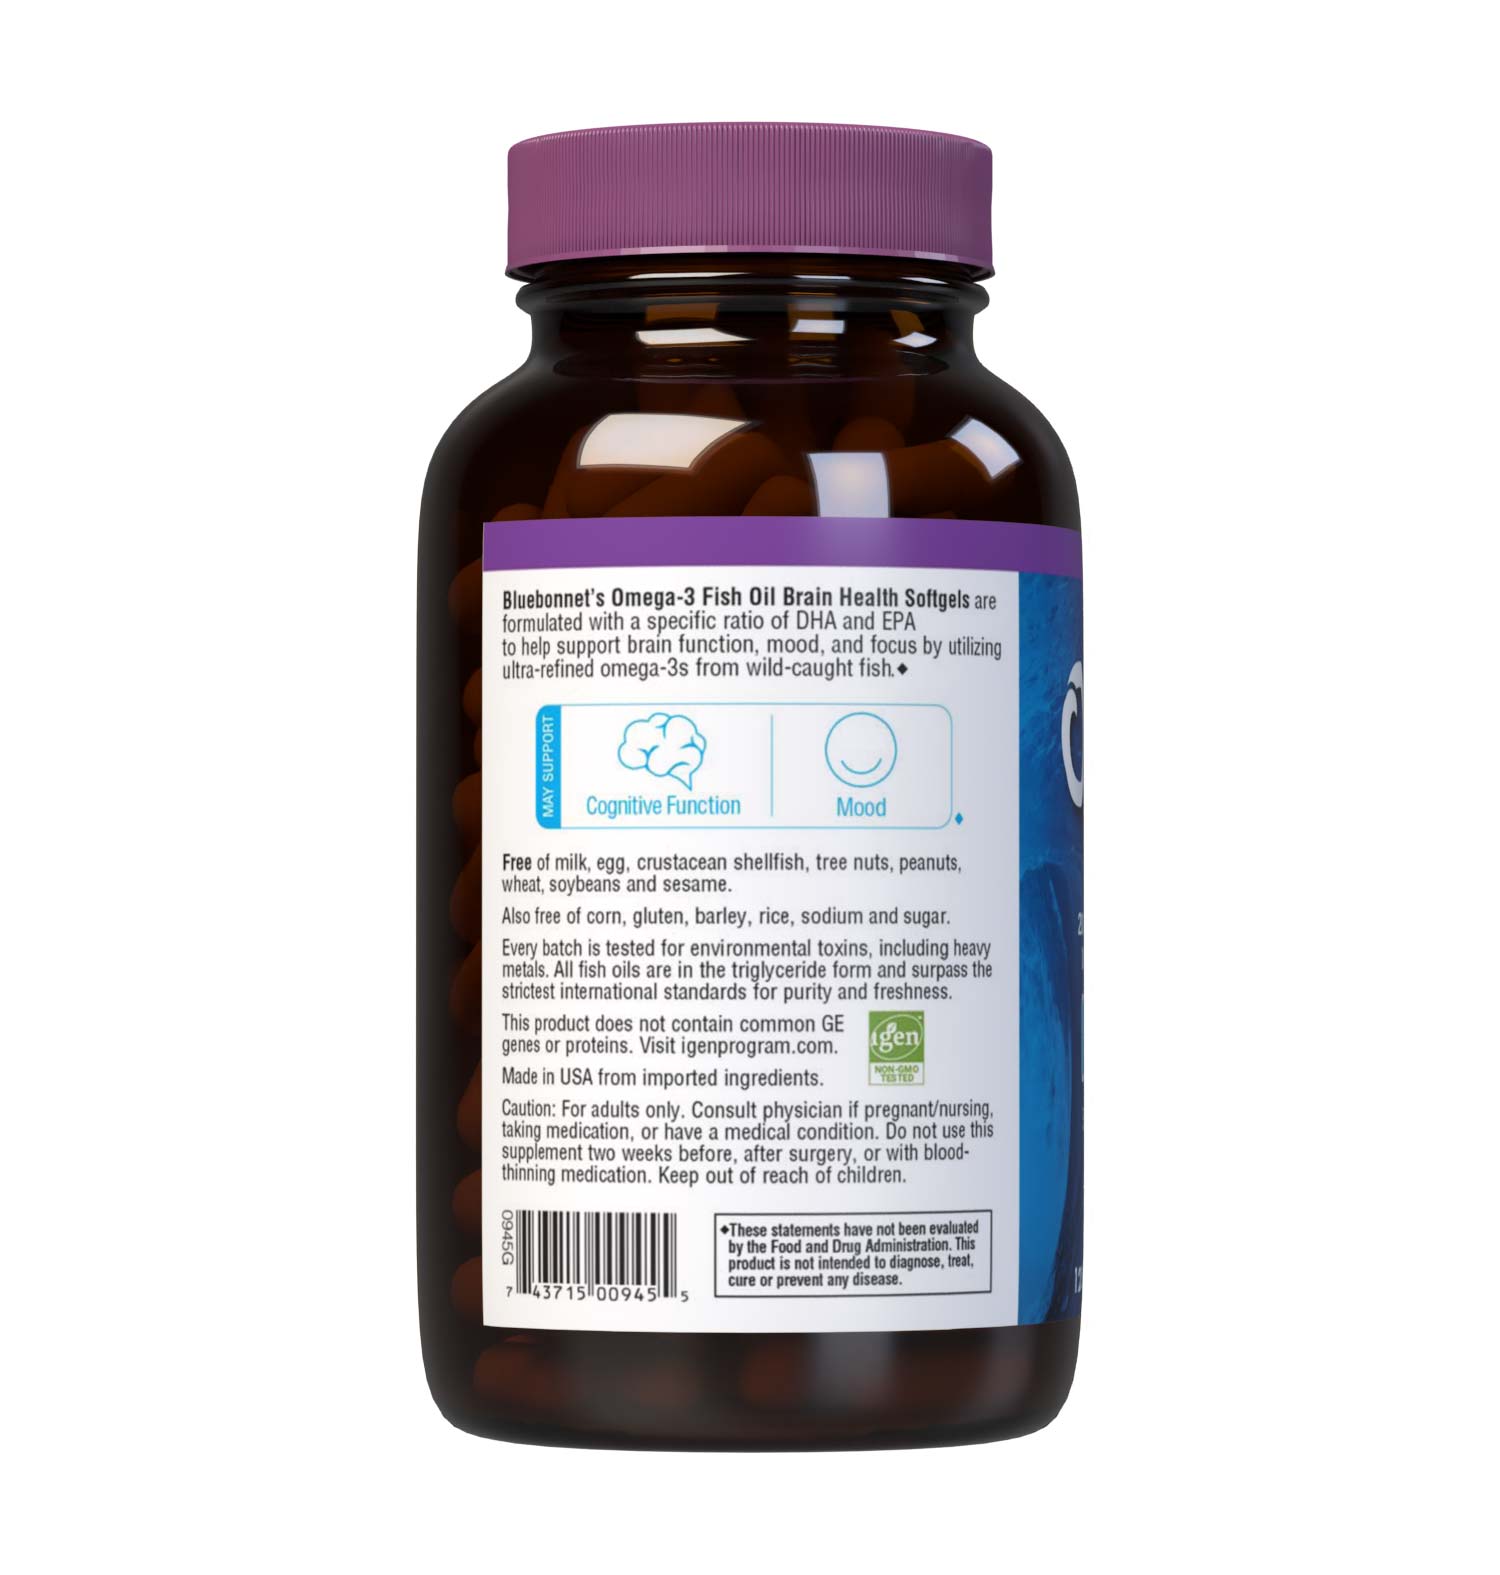 Bluebonnet’s Omega-3 Fish Oil Brain Health 120 Softgels are formulated with a specific ratio of DHA and EPA to help support brain function, mood, and focus by utilizing ultra-refined omega-3s from wild-caught fish. Description panel. #size_120 count